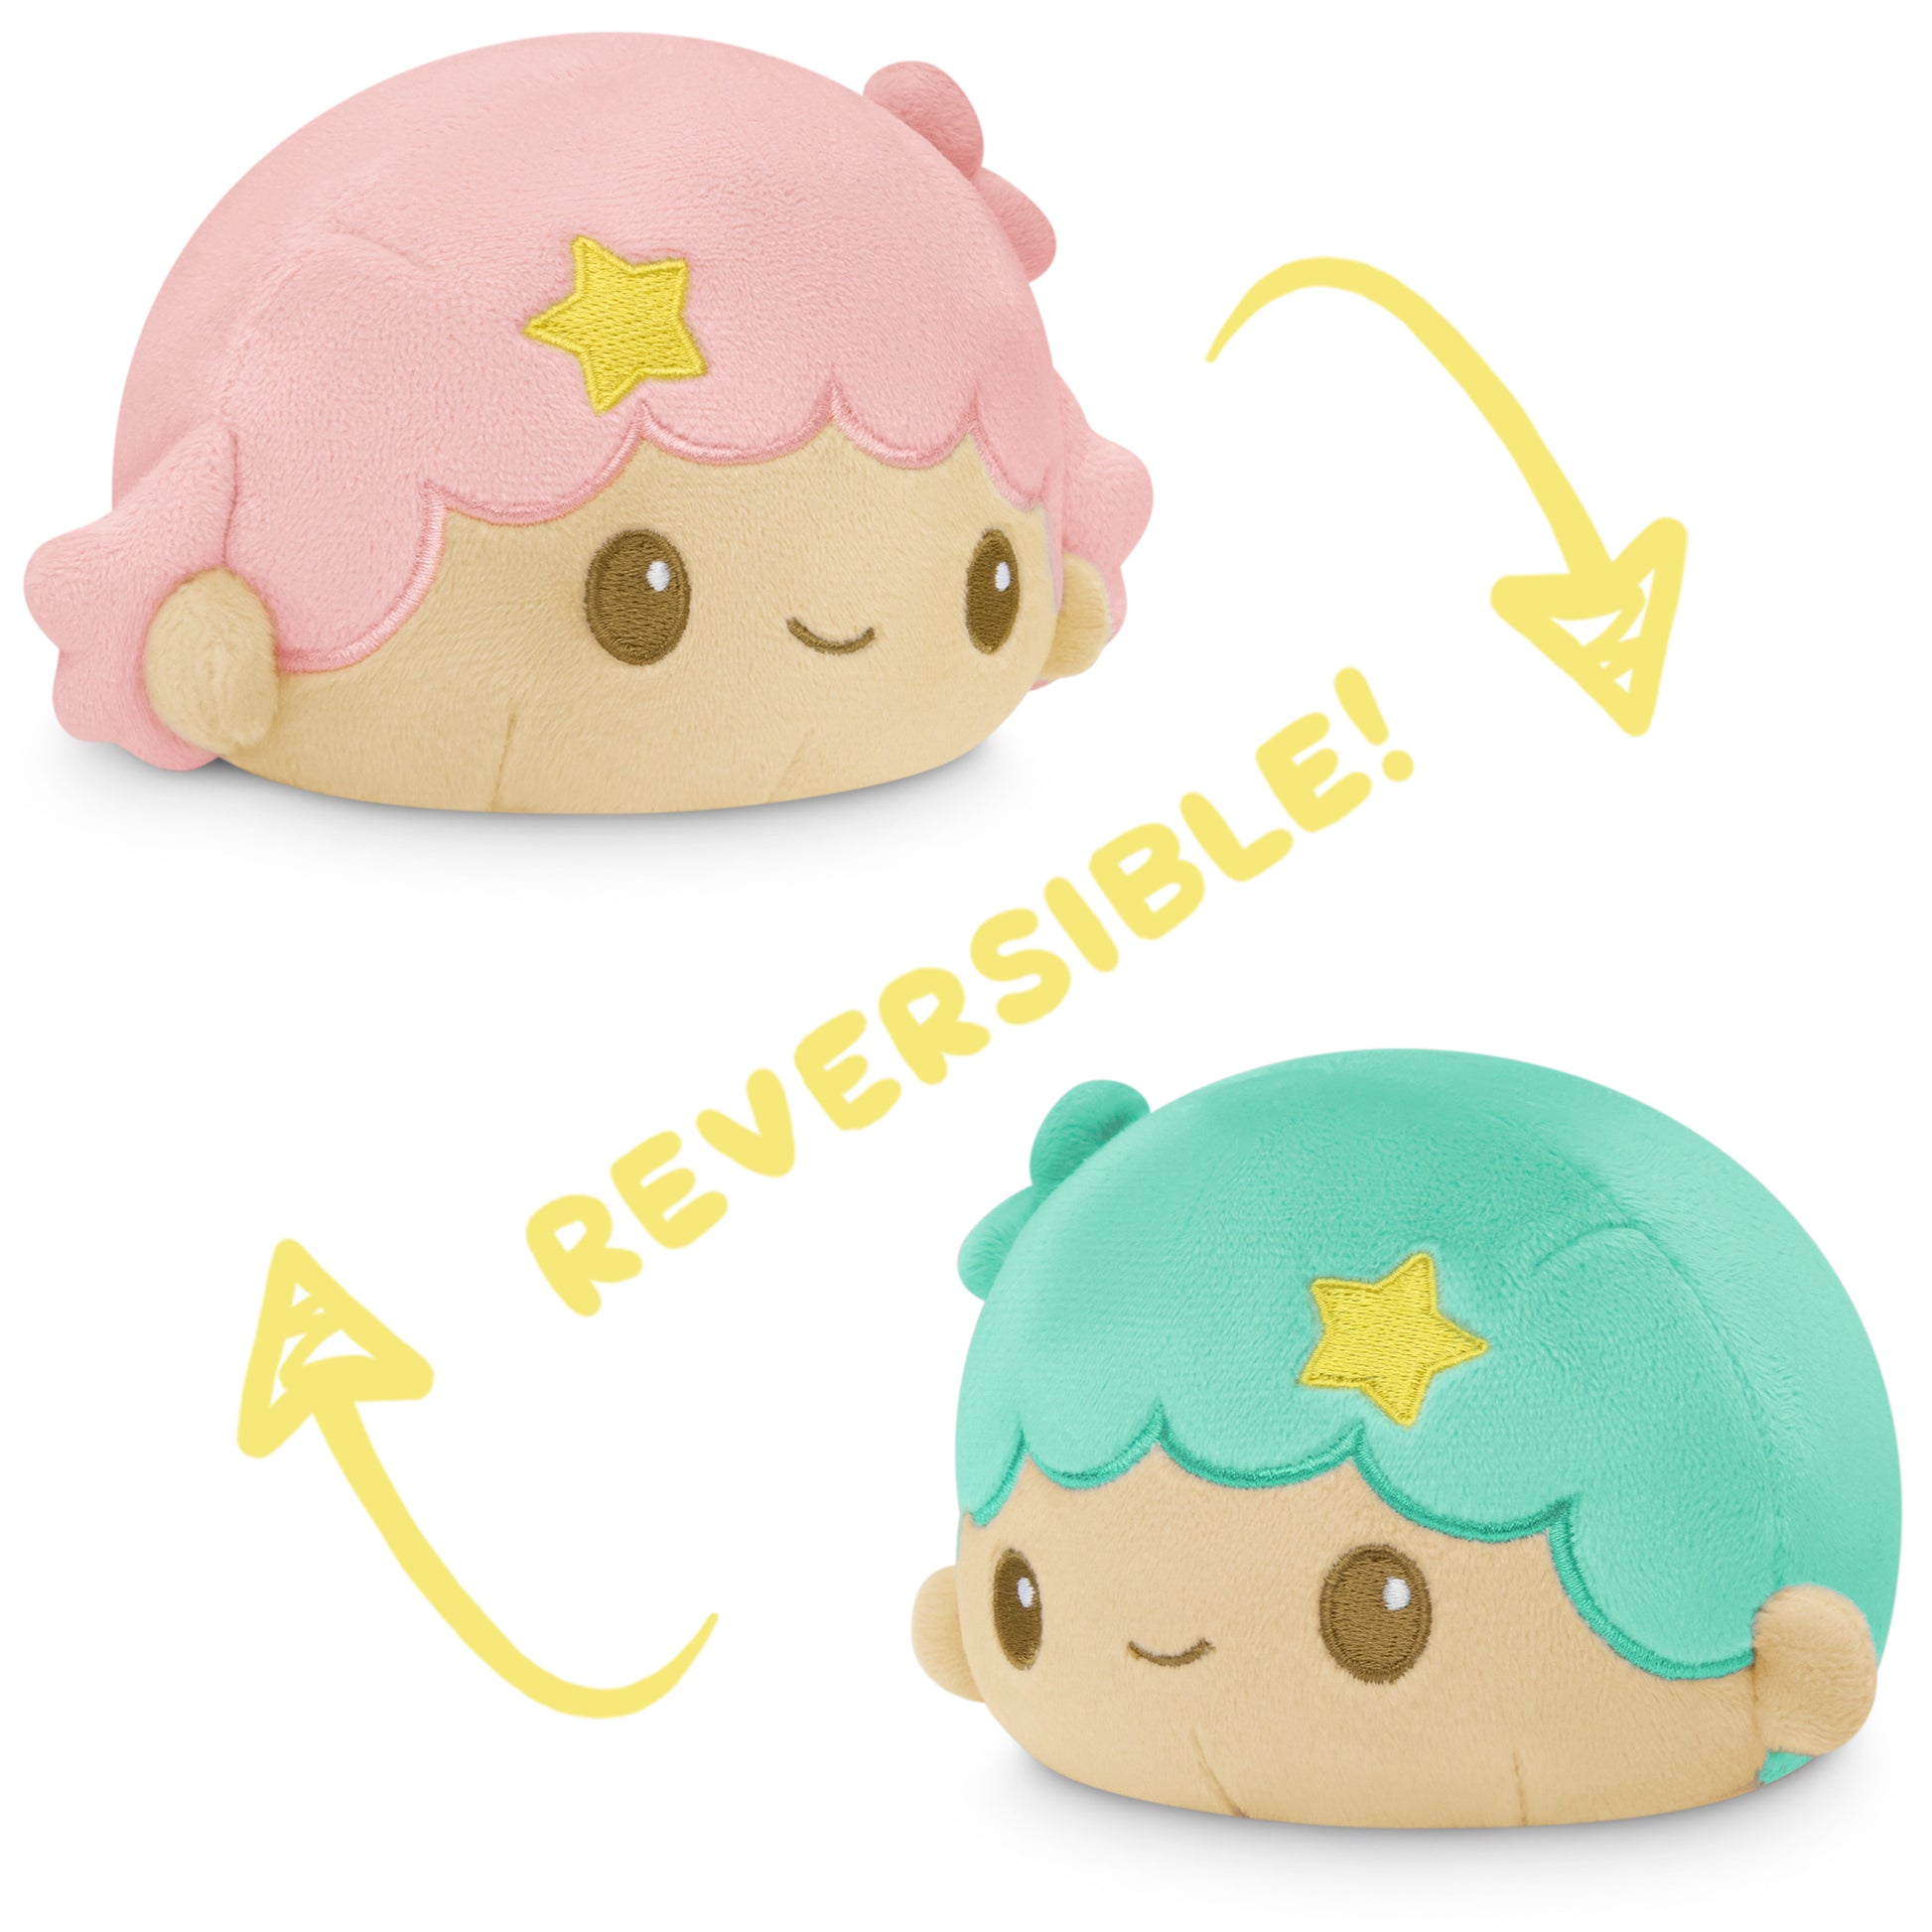 Two TeeTurtle Reversible Little Twin Stars Plushies, inspired by the Little Twin Stars characters, featuring Sanrio designs.